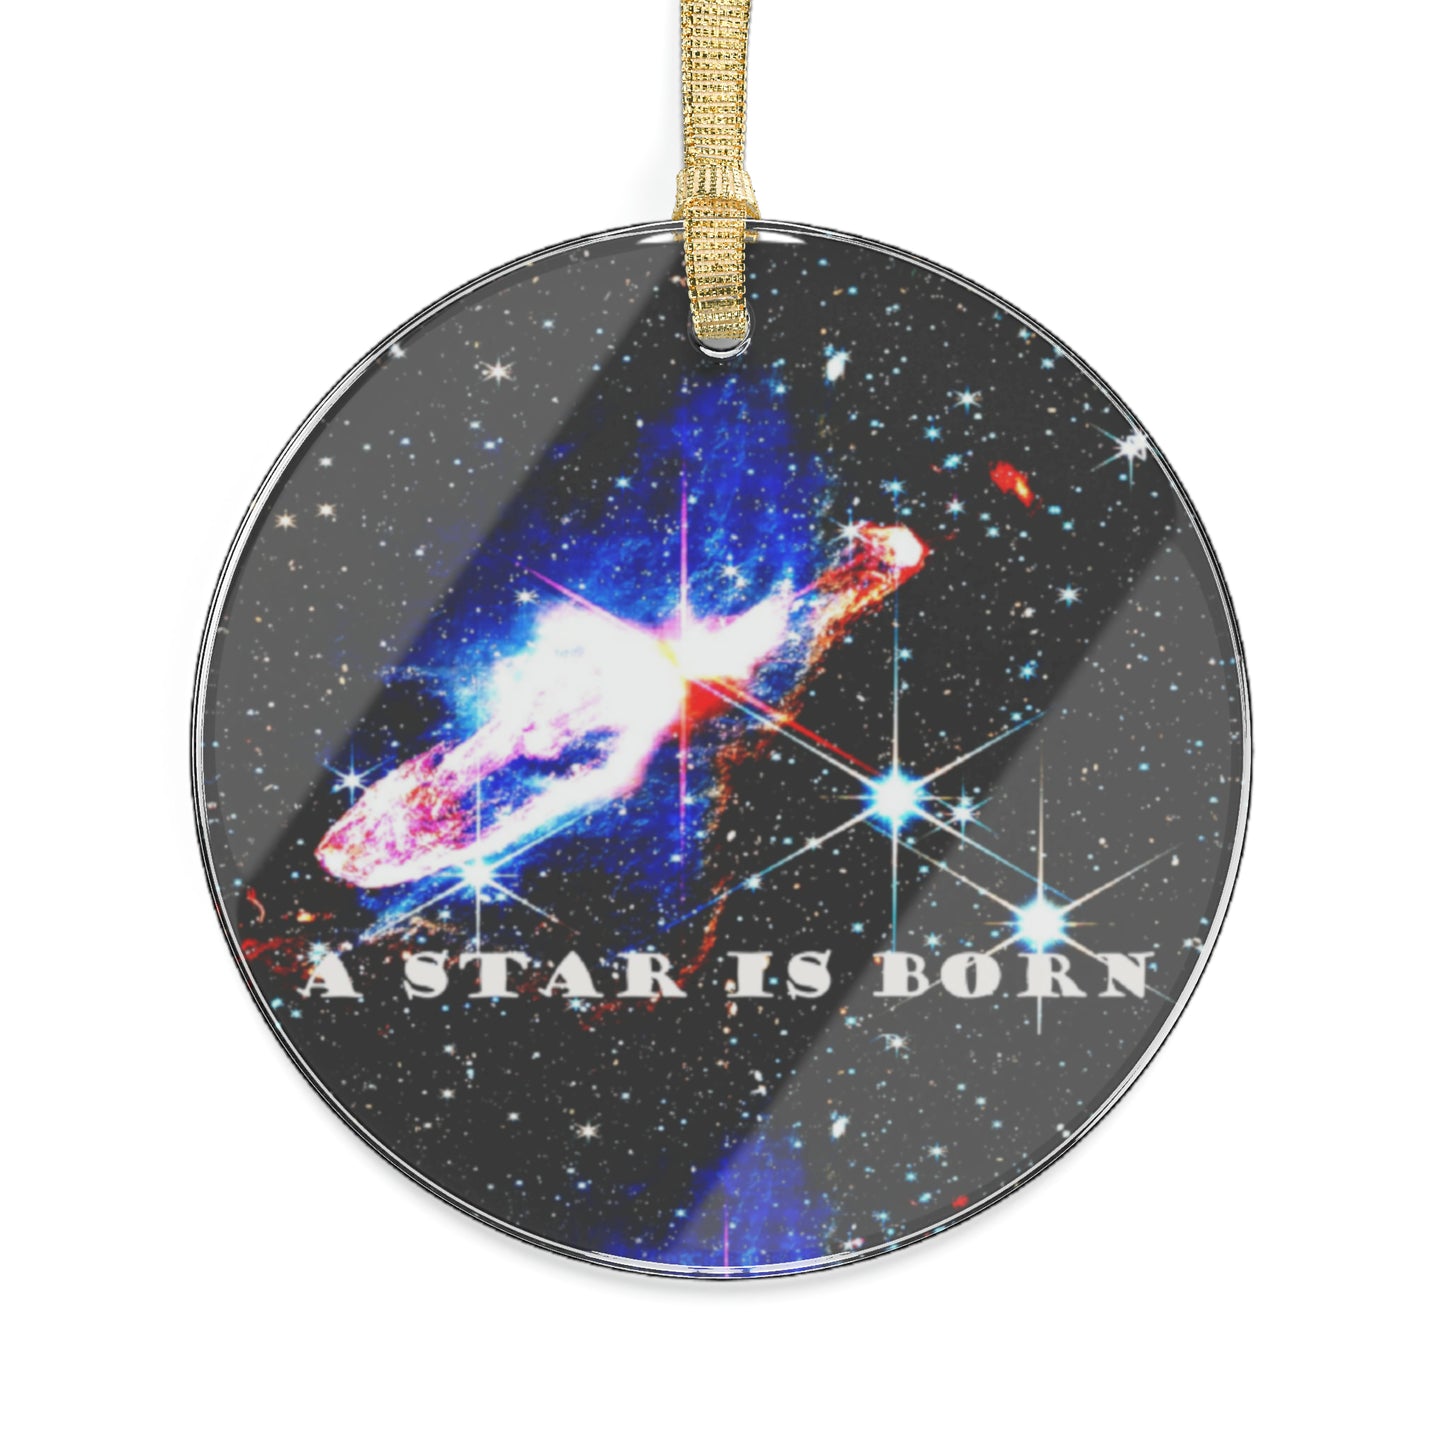 ✨ Deck Your Halls with Starlight: Cosmos Series Acrylic Ornaments ✨